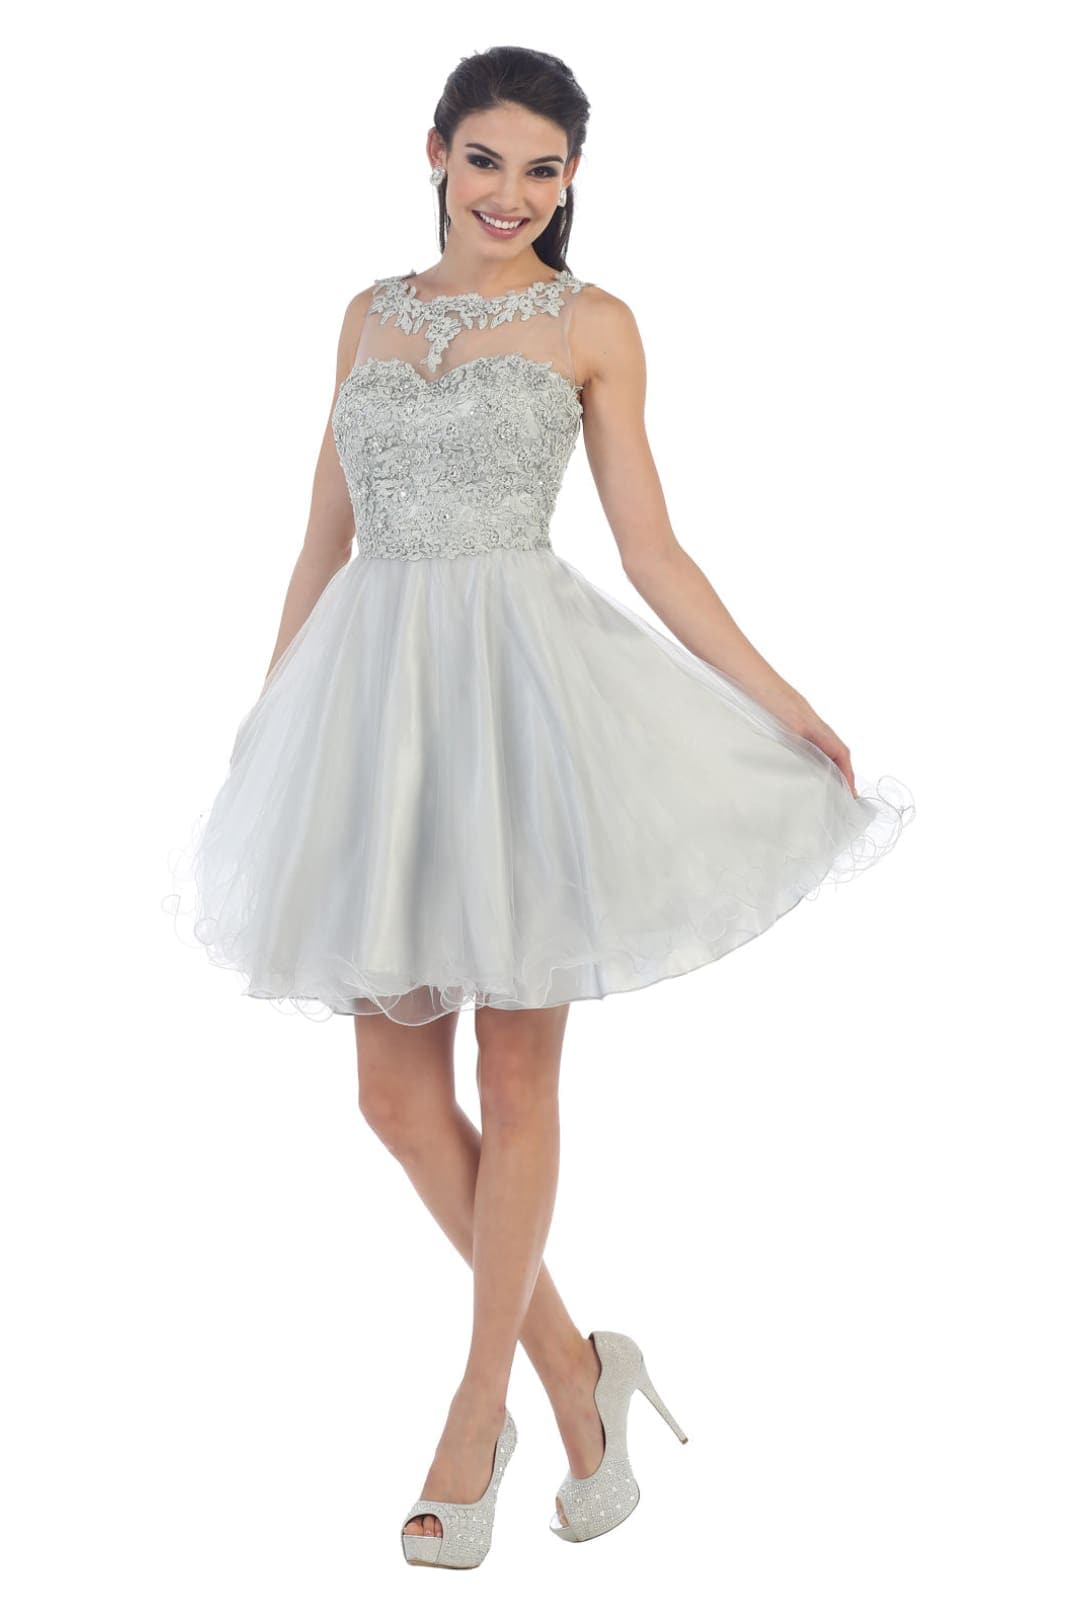 May Queen MQ1429 Sleeveless Sheer Embroidered Bodice Short Cocktail Dress - Silver / 20